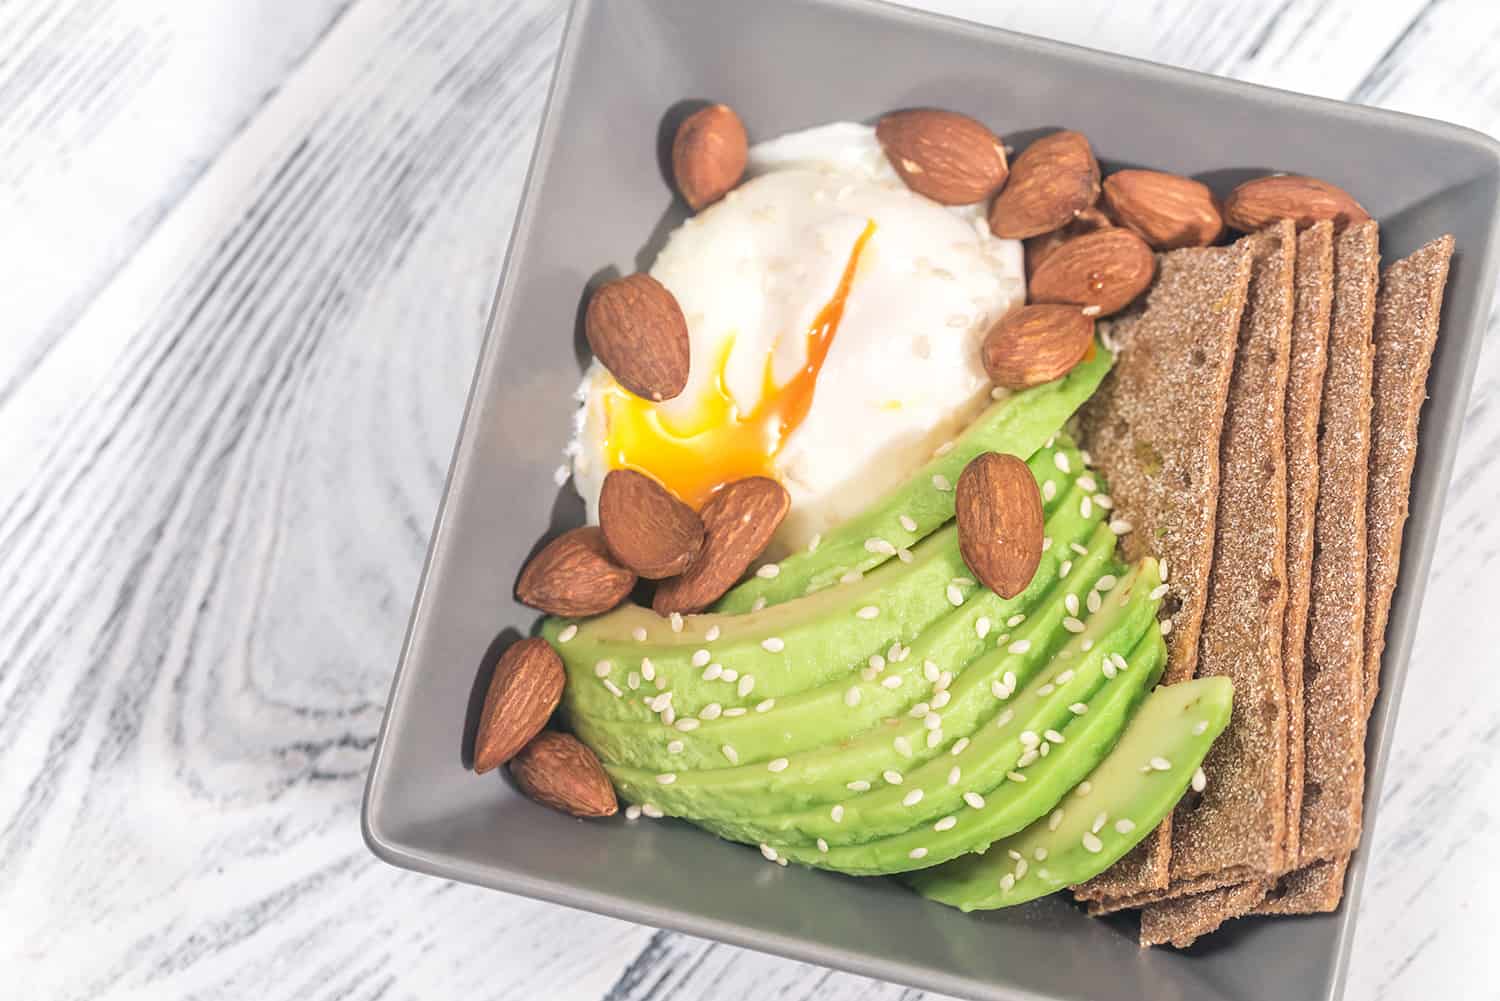 Poached egg with avocado and almonds